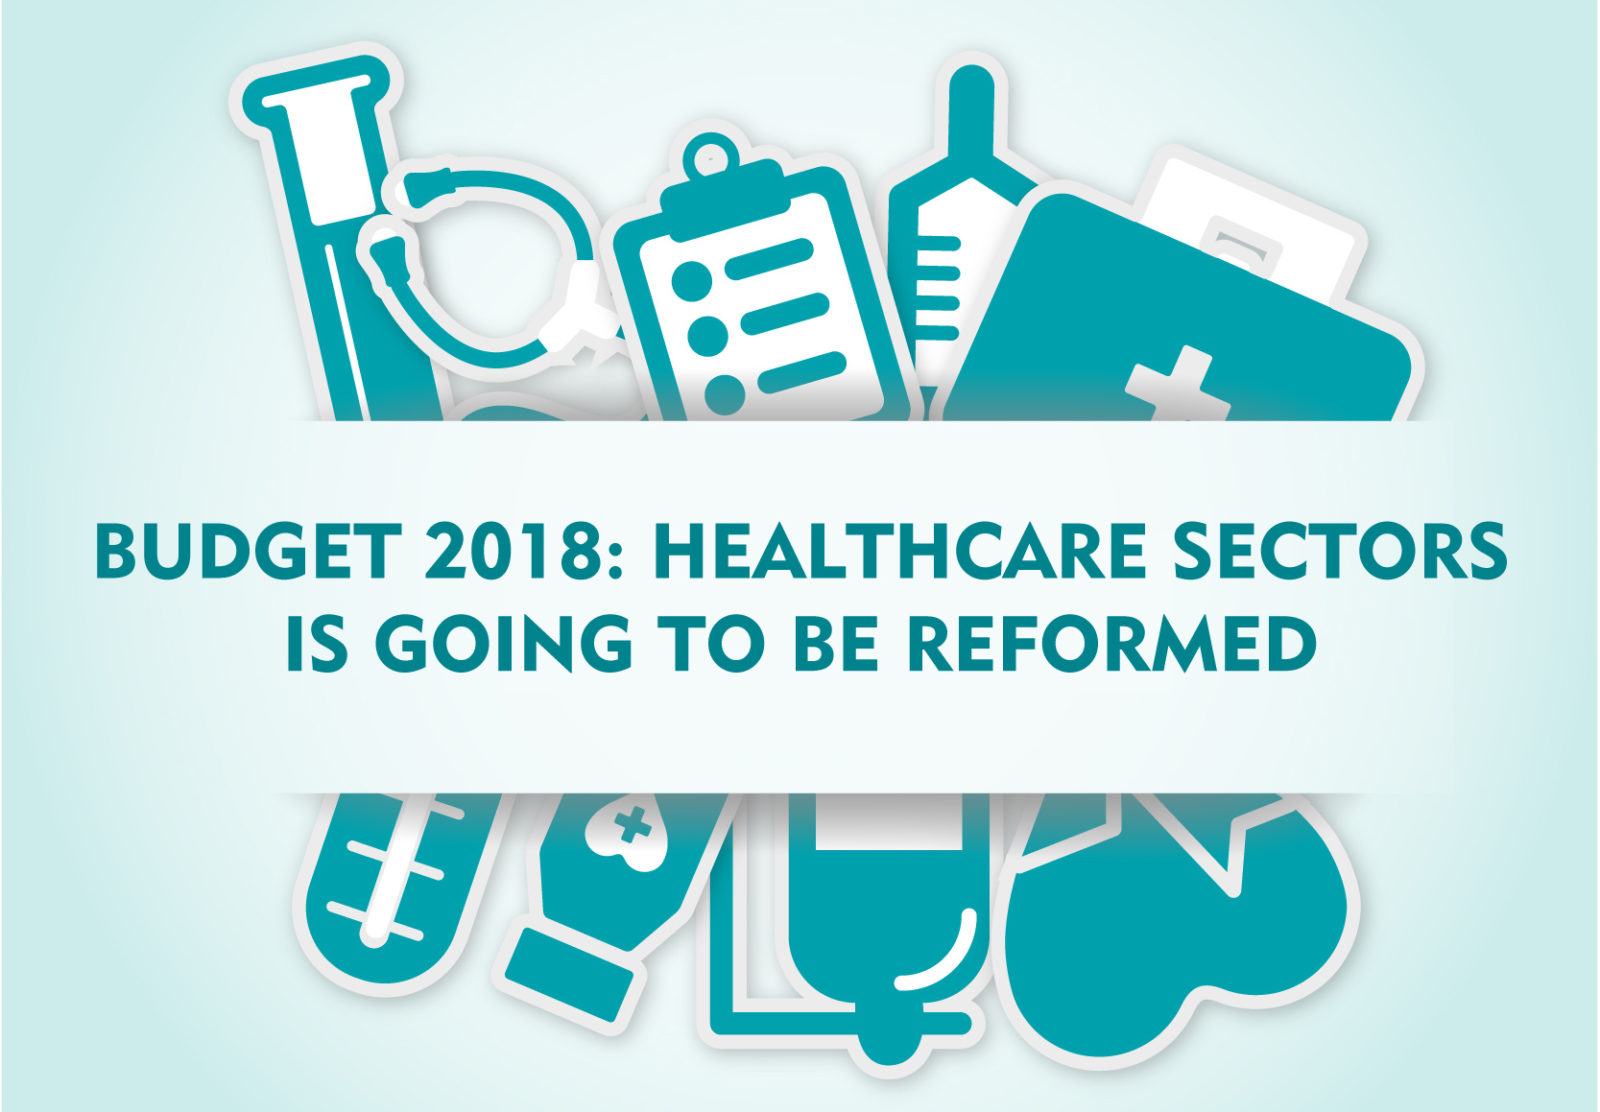 Budget 2018: Healthcare Sectors is Going to be Reformed in Upcoming Years All the Way